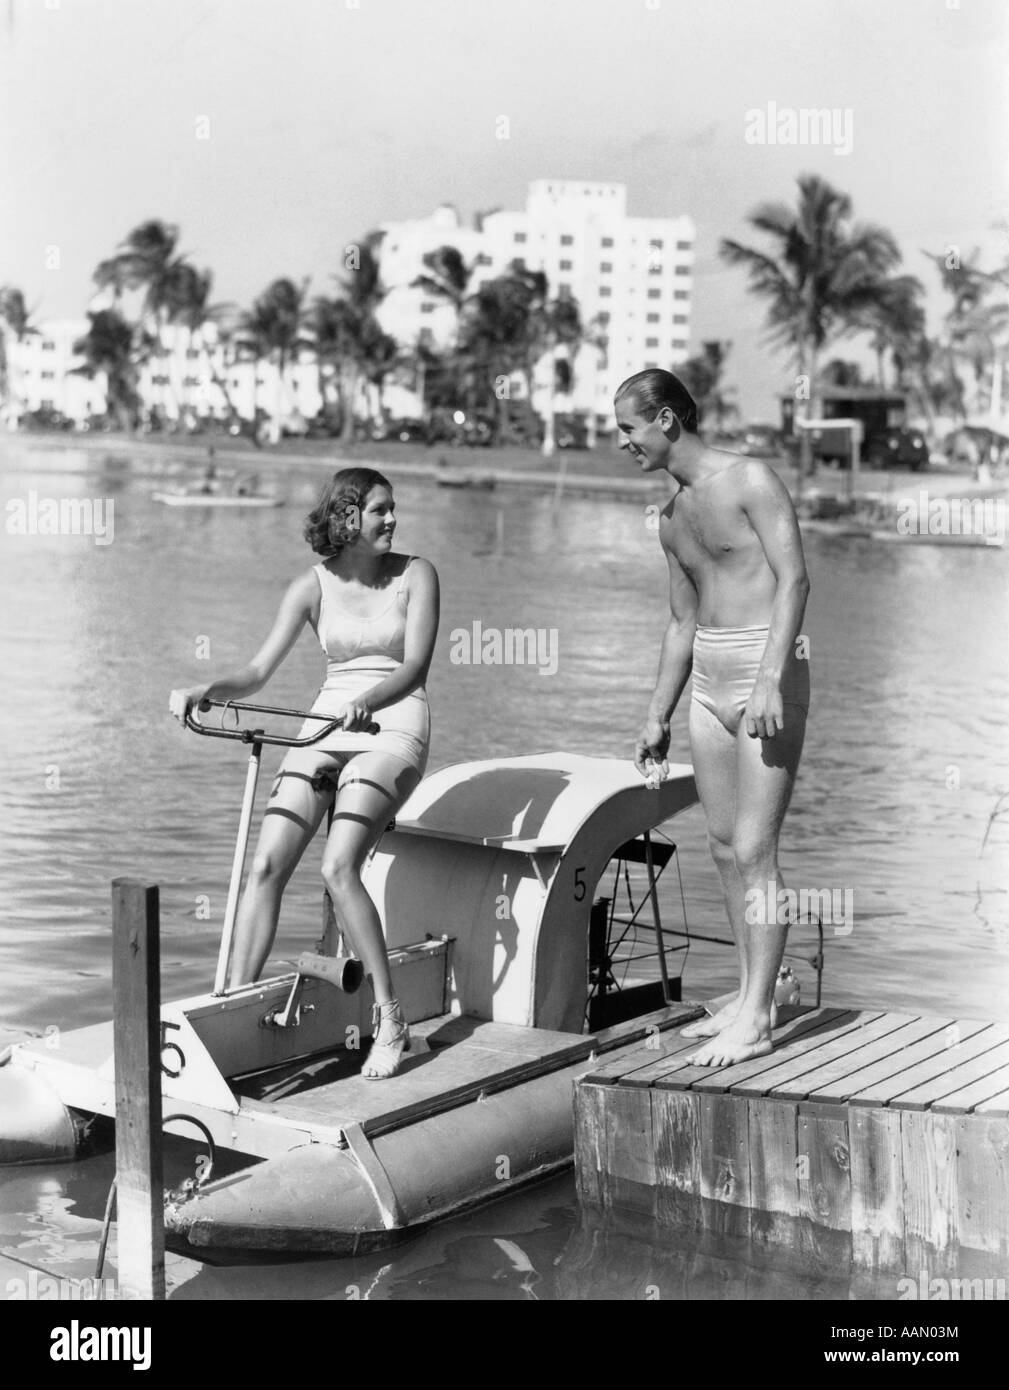 Pedal boat Black and White Stock Photos & Images - Alamy